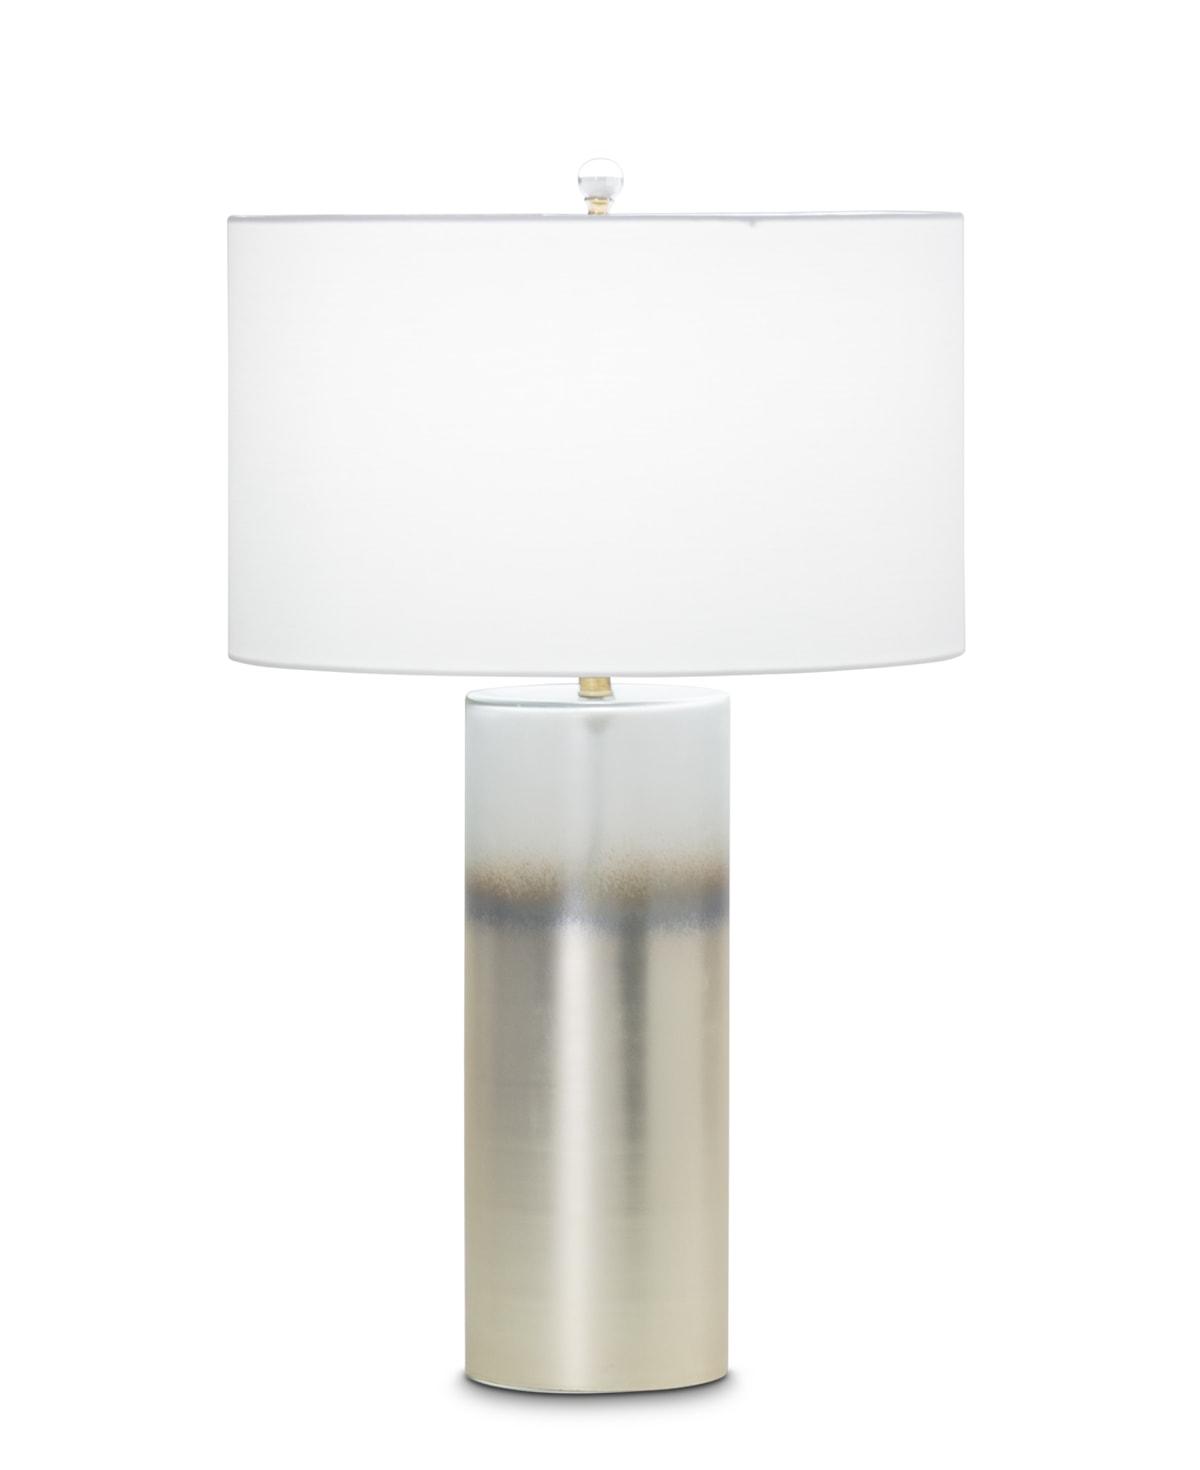 FlowDecor Barrett Table Lamp in mouth-blown glass with pearlescent graduated finish and off-white cotton drum shade (# 3850)